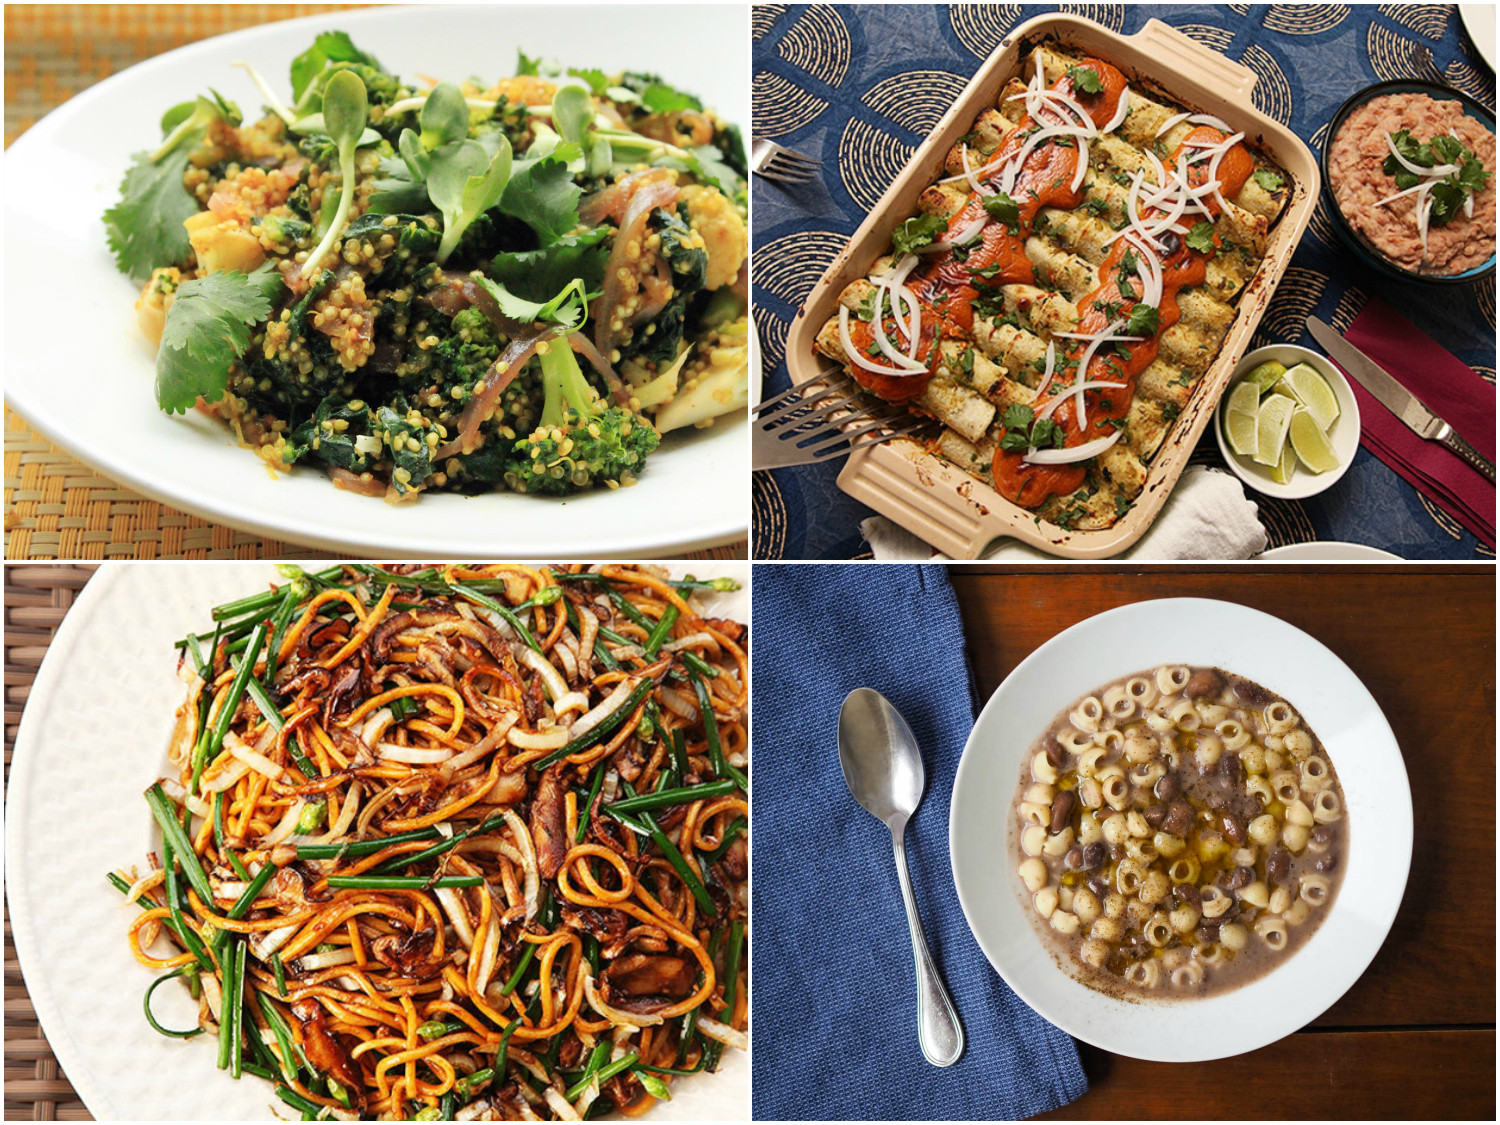 Vegetarian Main Dishes Recipes
 14 Warming Vegan Main Dishes for Chilly Nights